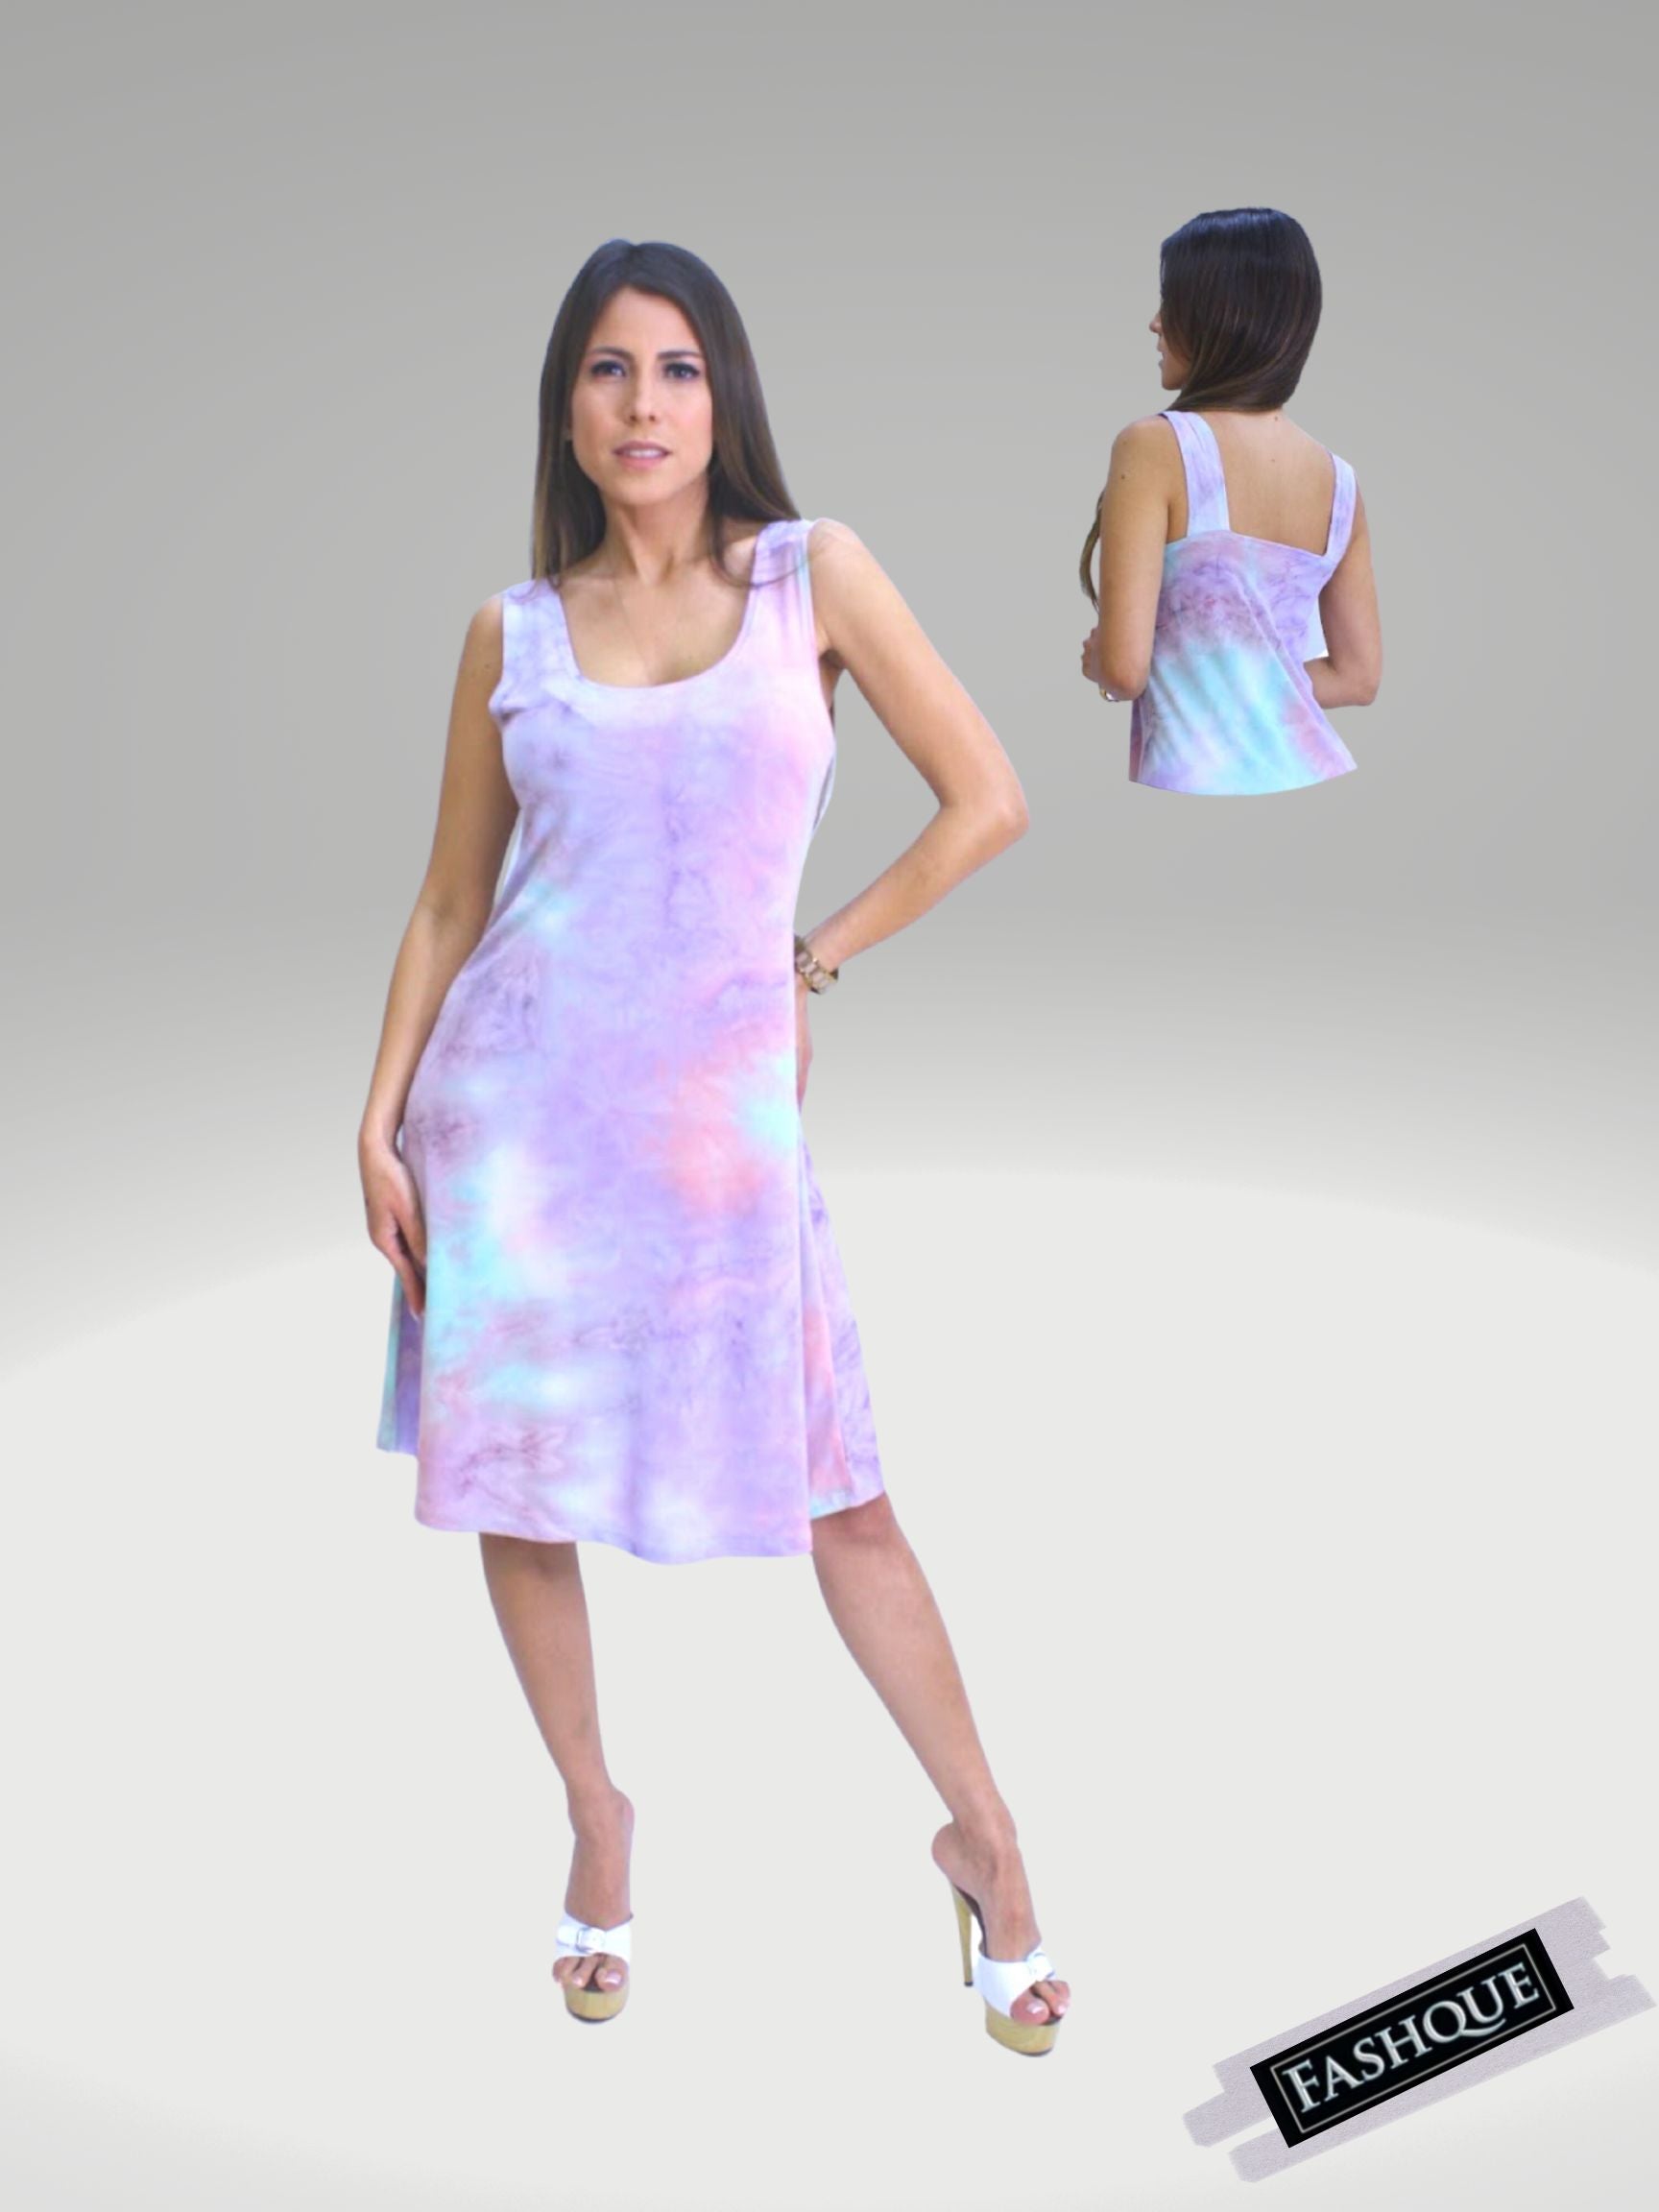 FASHQUE - SUNDRESS - Skater Style tank dress with square back  - D001 SALE